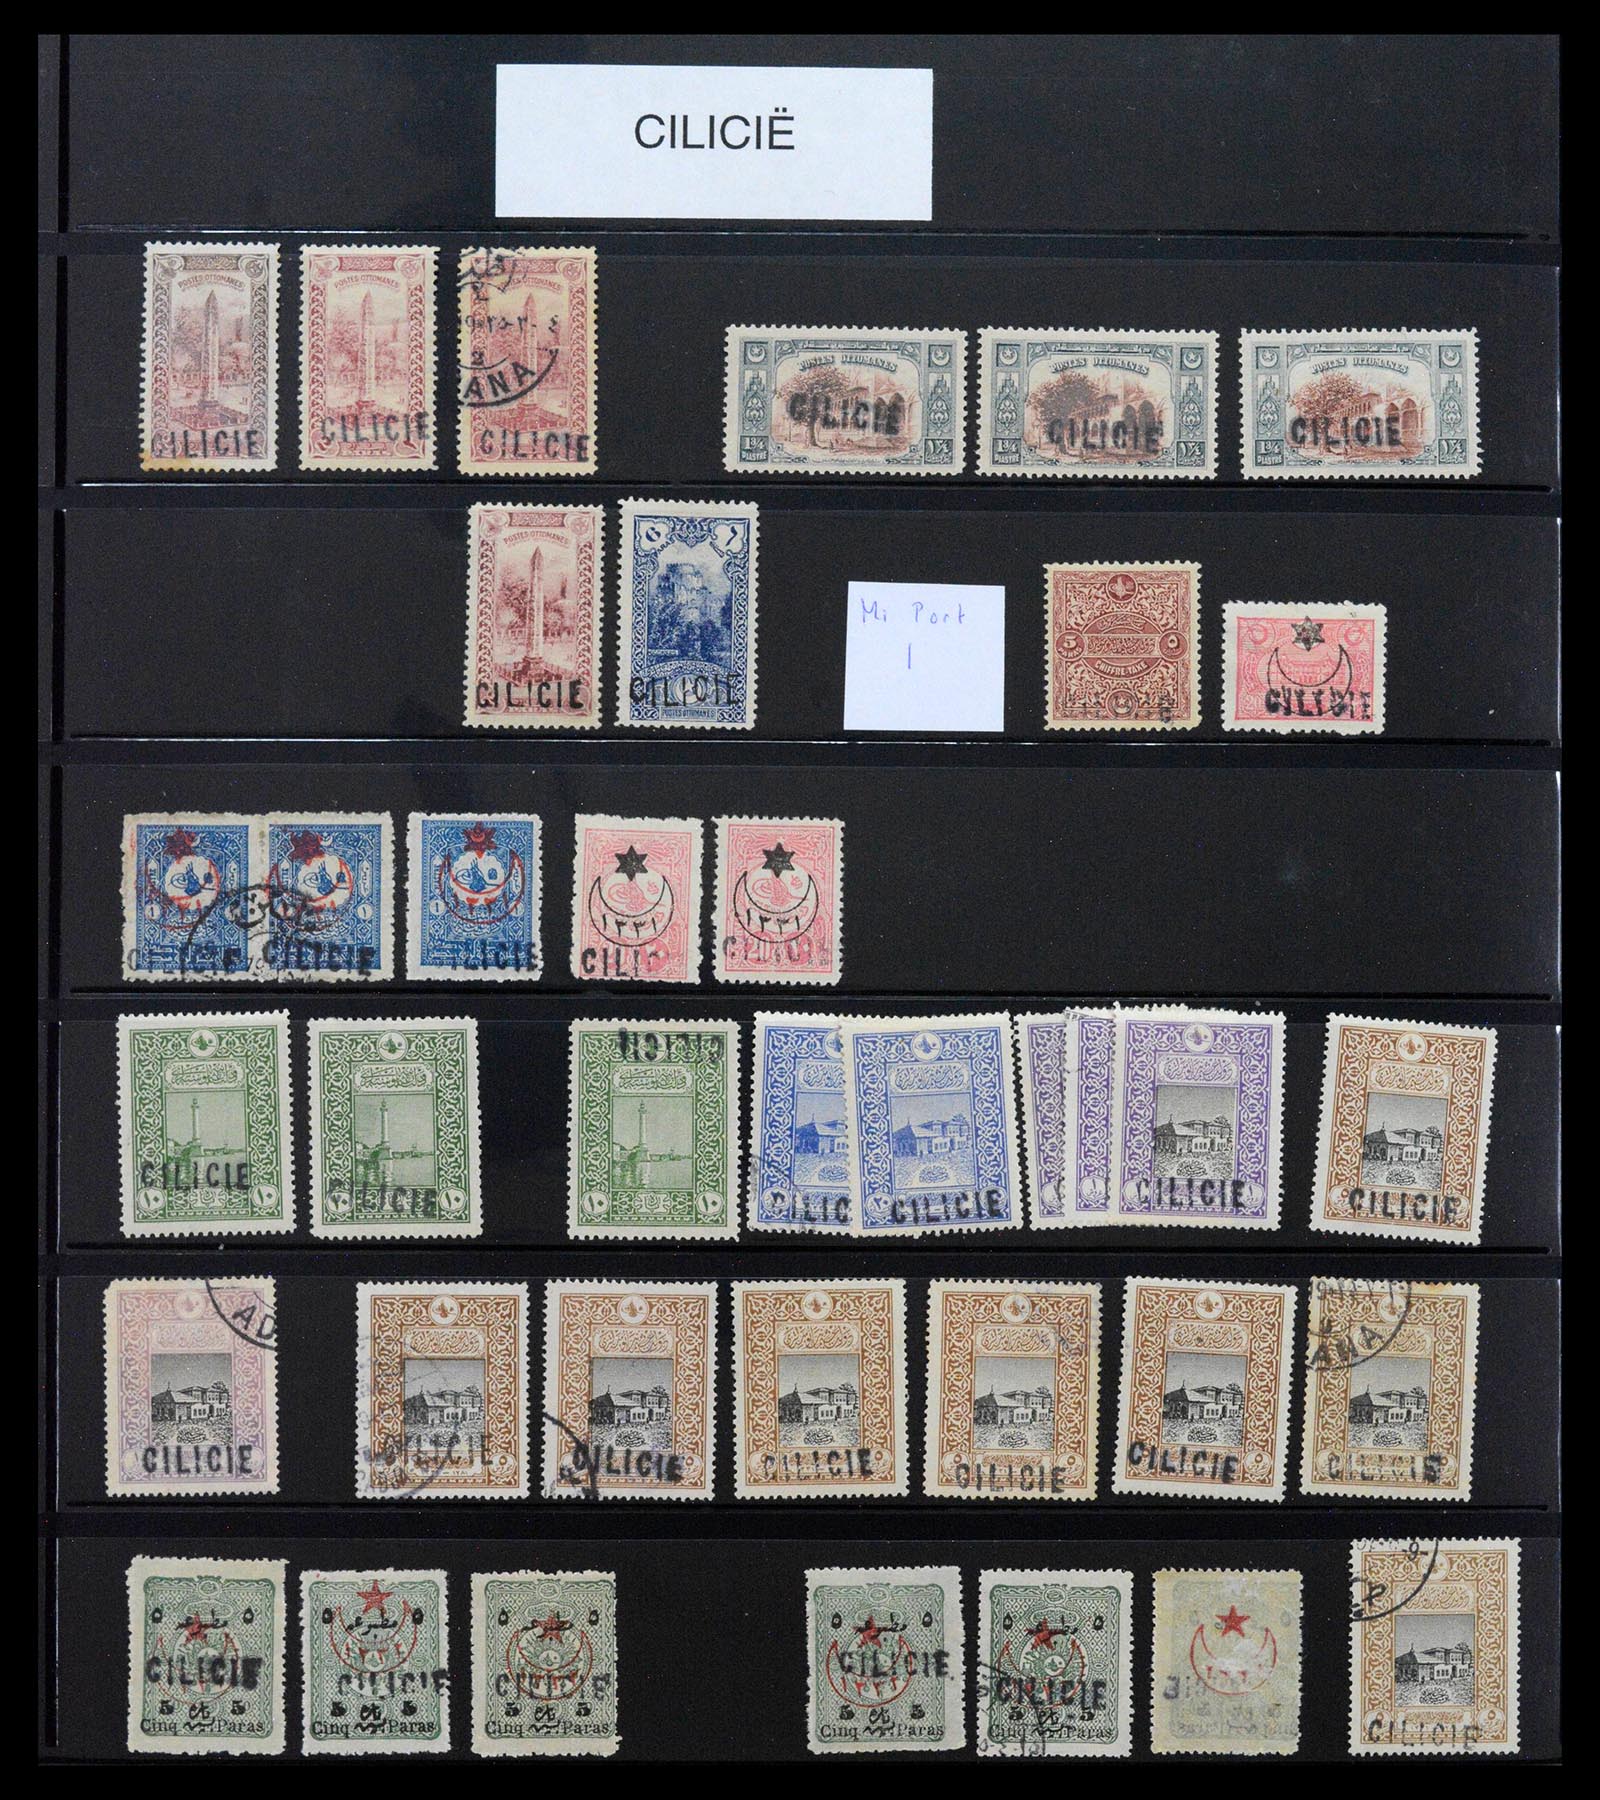 39457 0001 - Stamp collection 39457 Cilicia 1919-1921.